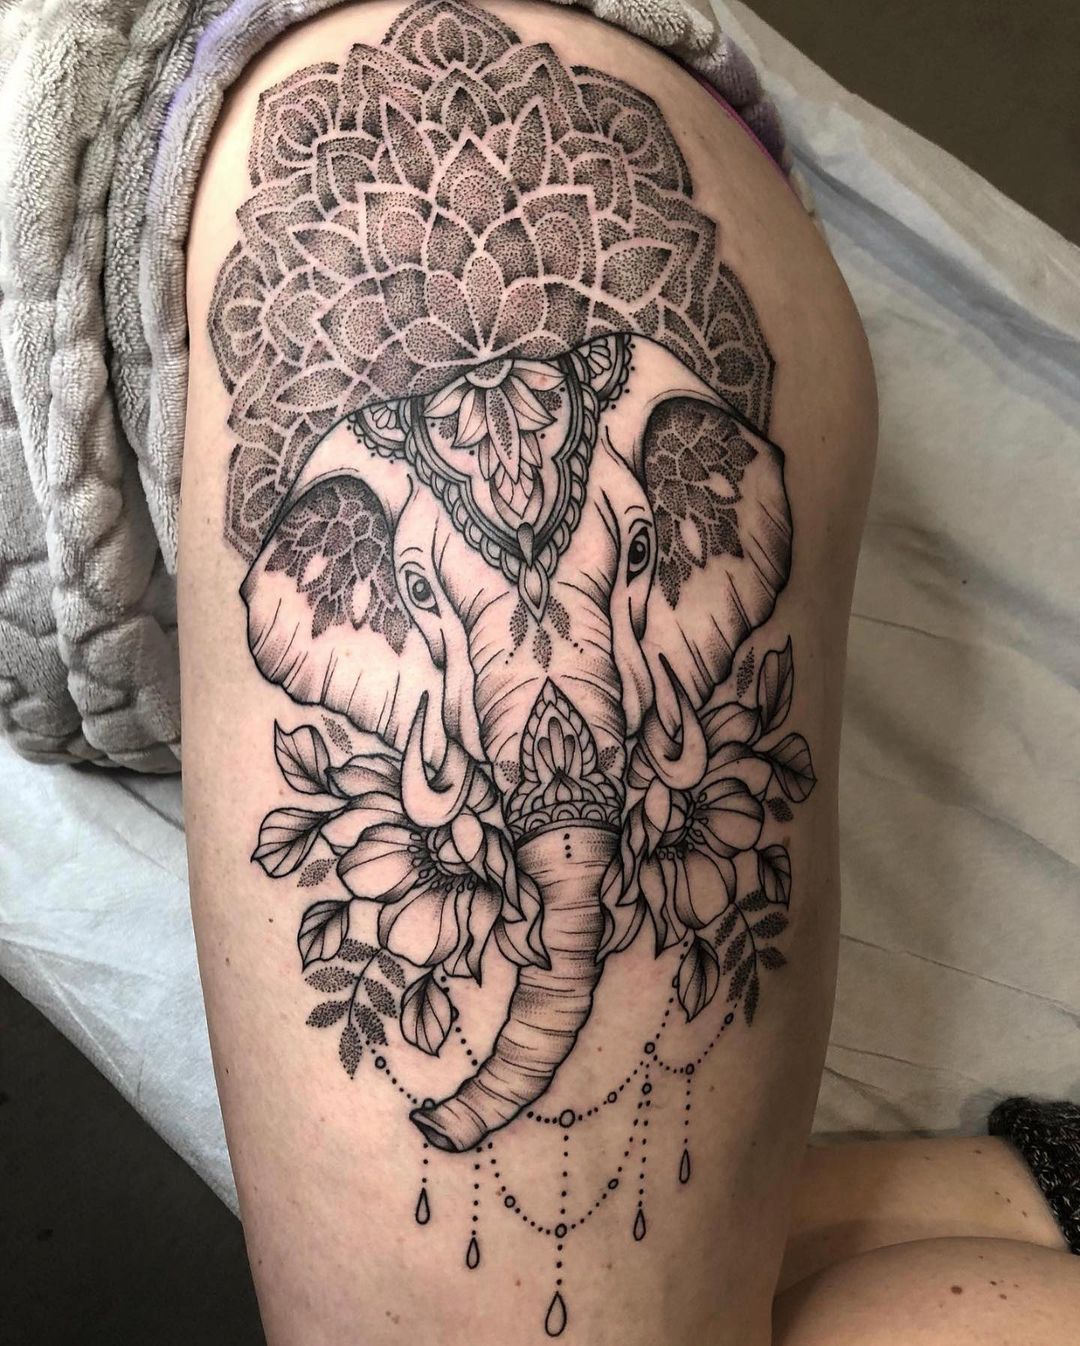 Southgate SG Tattoo  Piercing Studio on Twitter  Elephant  custom  beautiful feminine piece by our resident nsmactattoos For bookings and  info  httpstcoHvMP8hx9uB  infosouthgatetattoocouk  07456415895WhatsApp only 